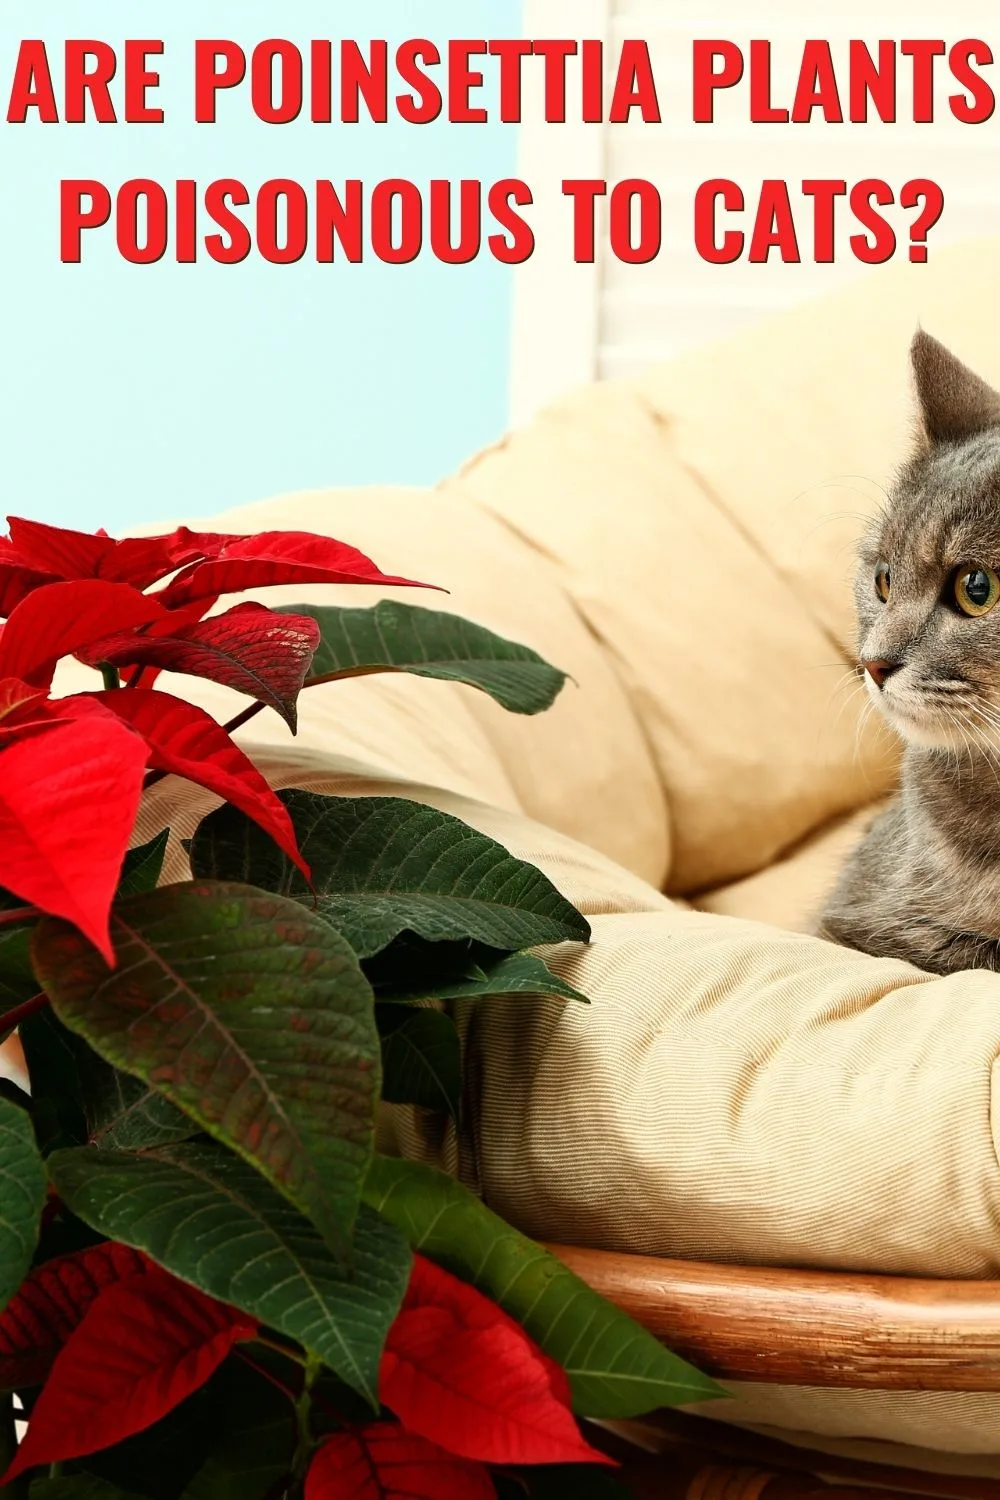 Are poinsettia plants poisonous to cats